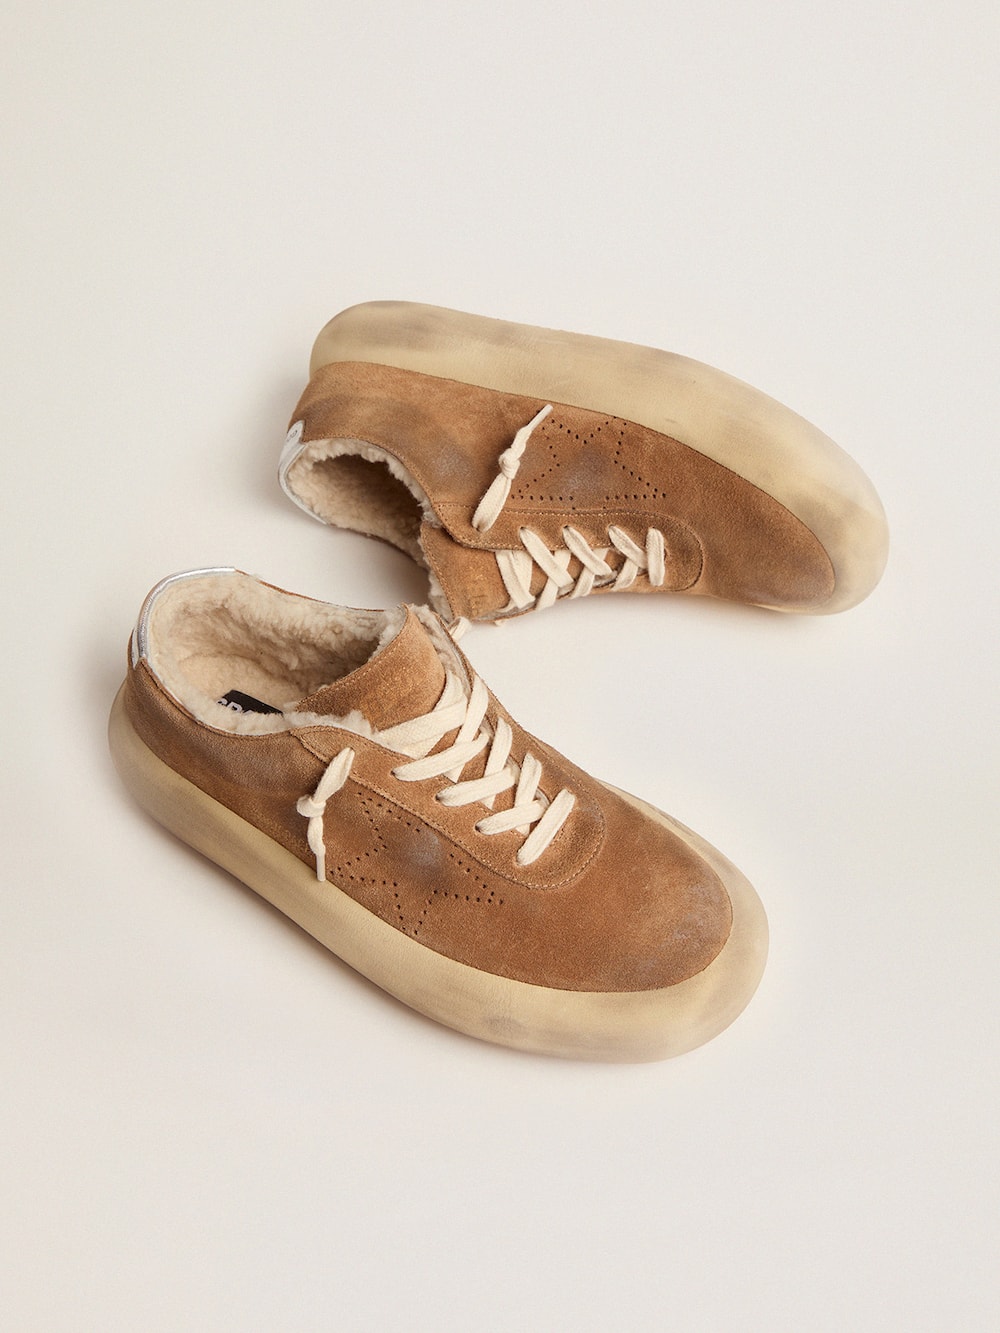 Golden Goose - Space-Star Uomo in suede tabacco e fodera in shearling in 